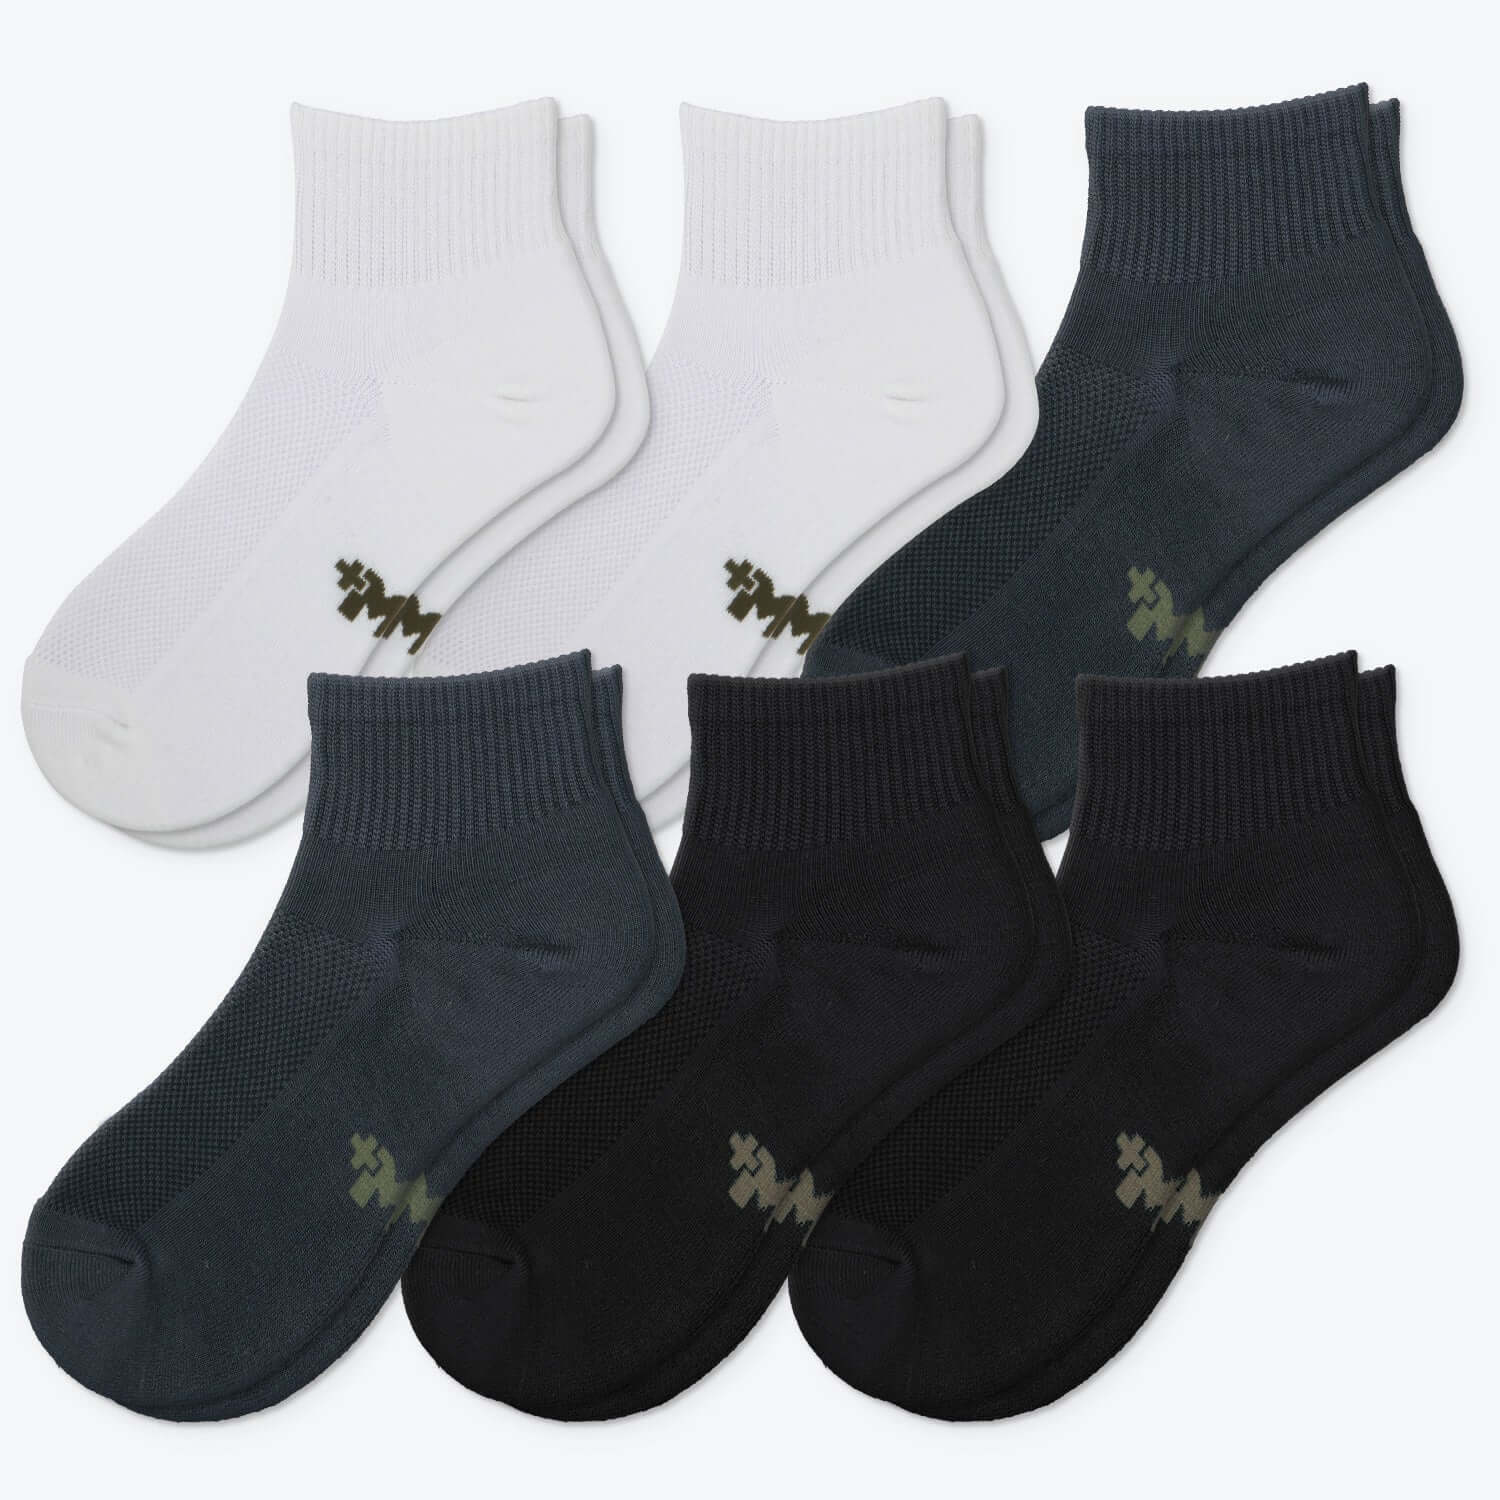 Smell Control Rayon from Bamboo Ankle Socks Cushioned, 6 Pairs - md-diab